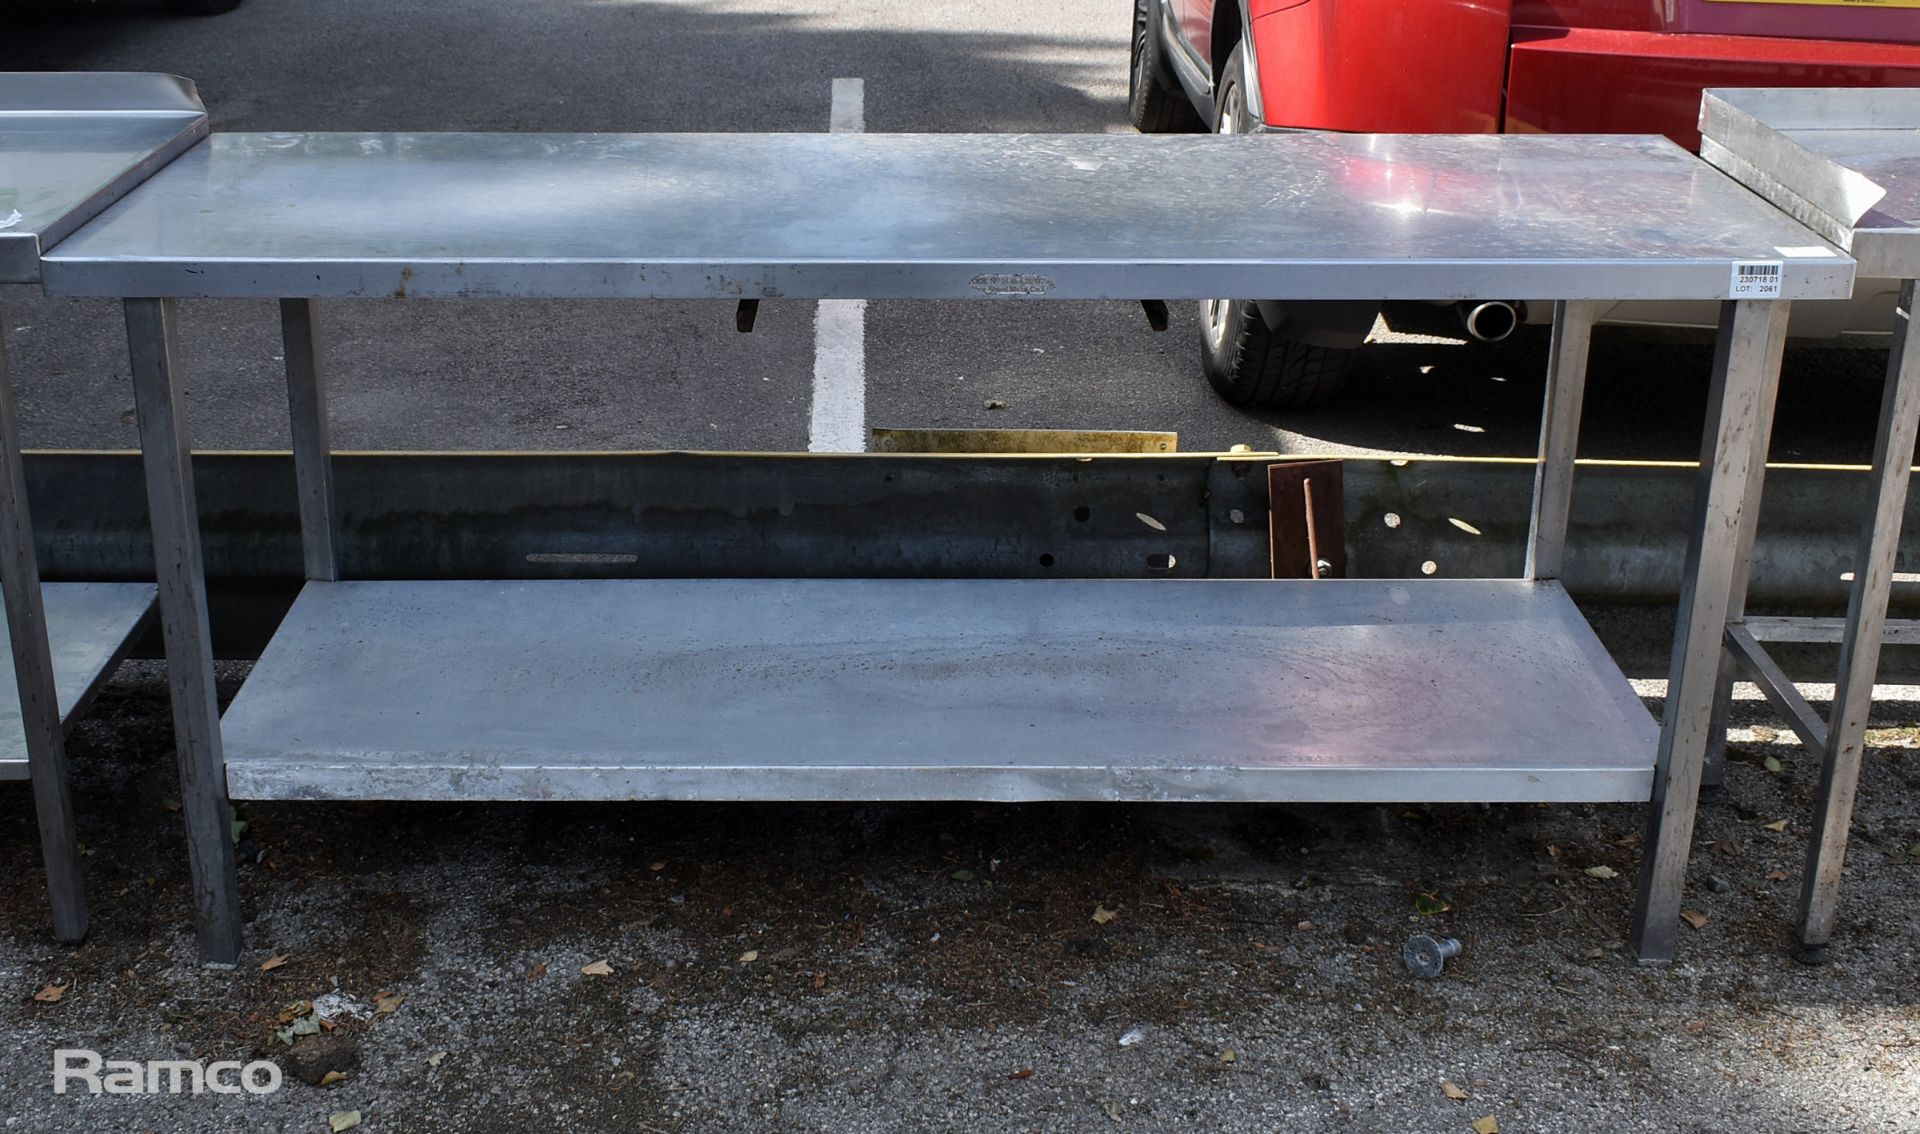 Stainless steel preparation table - L 1830 x W 610 x H 830mm